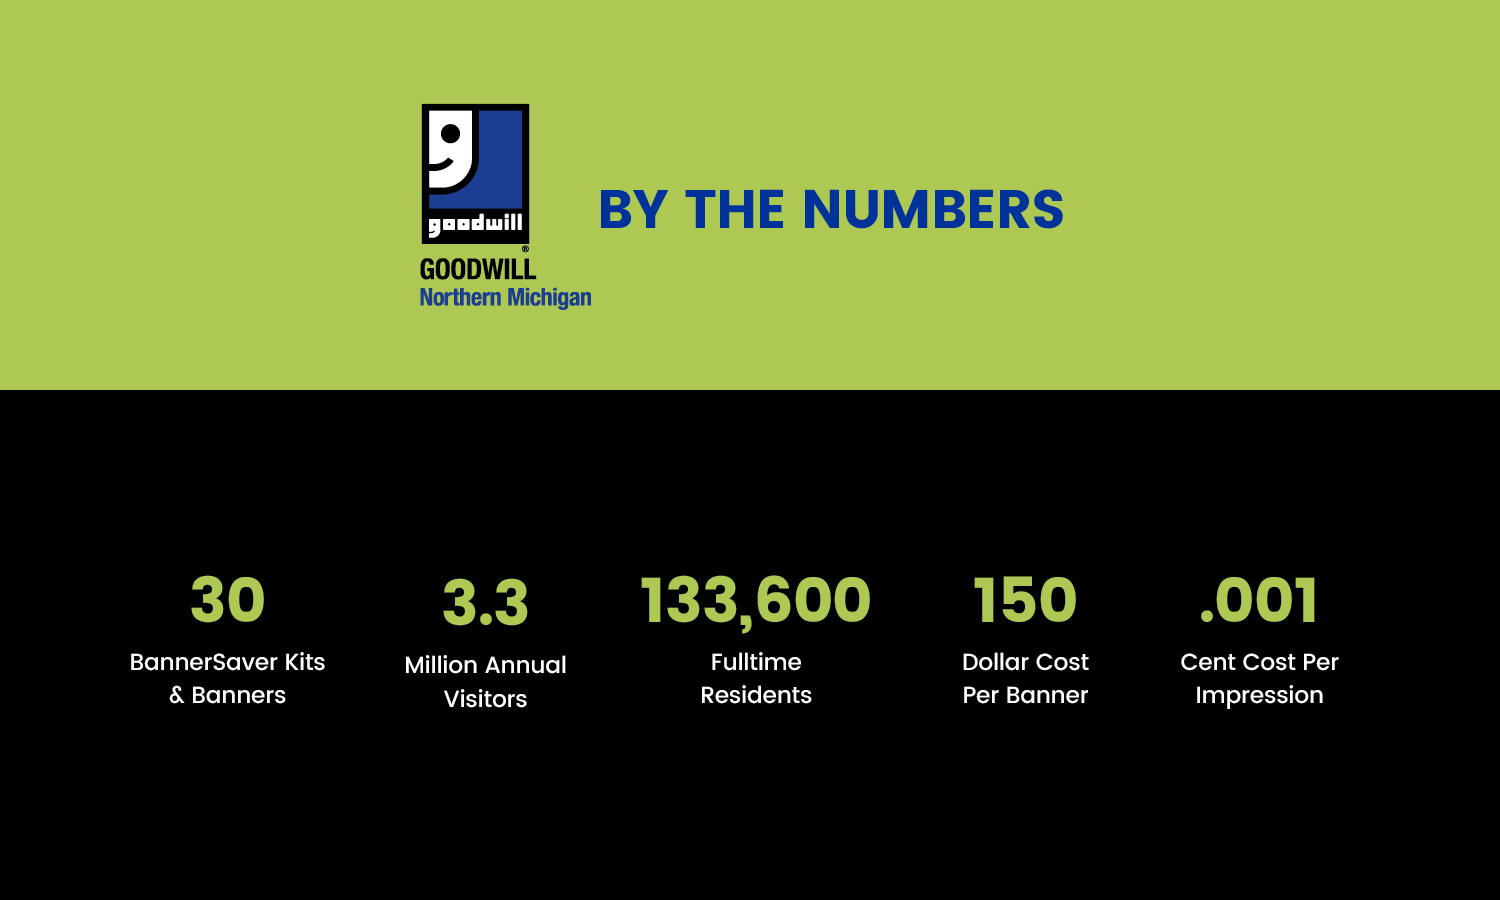 A graphic for Goodwill Northern Michigan that says 30 BannerSaver Kits & Banners,  3.3 Million annual visitors, 133600 fulltime residents, 150 dollar cost per banner, and 0.001 cost per impression